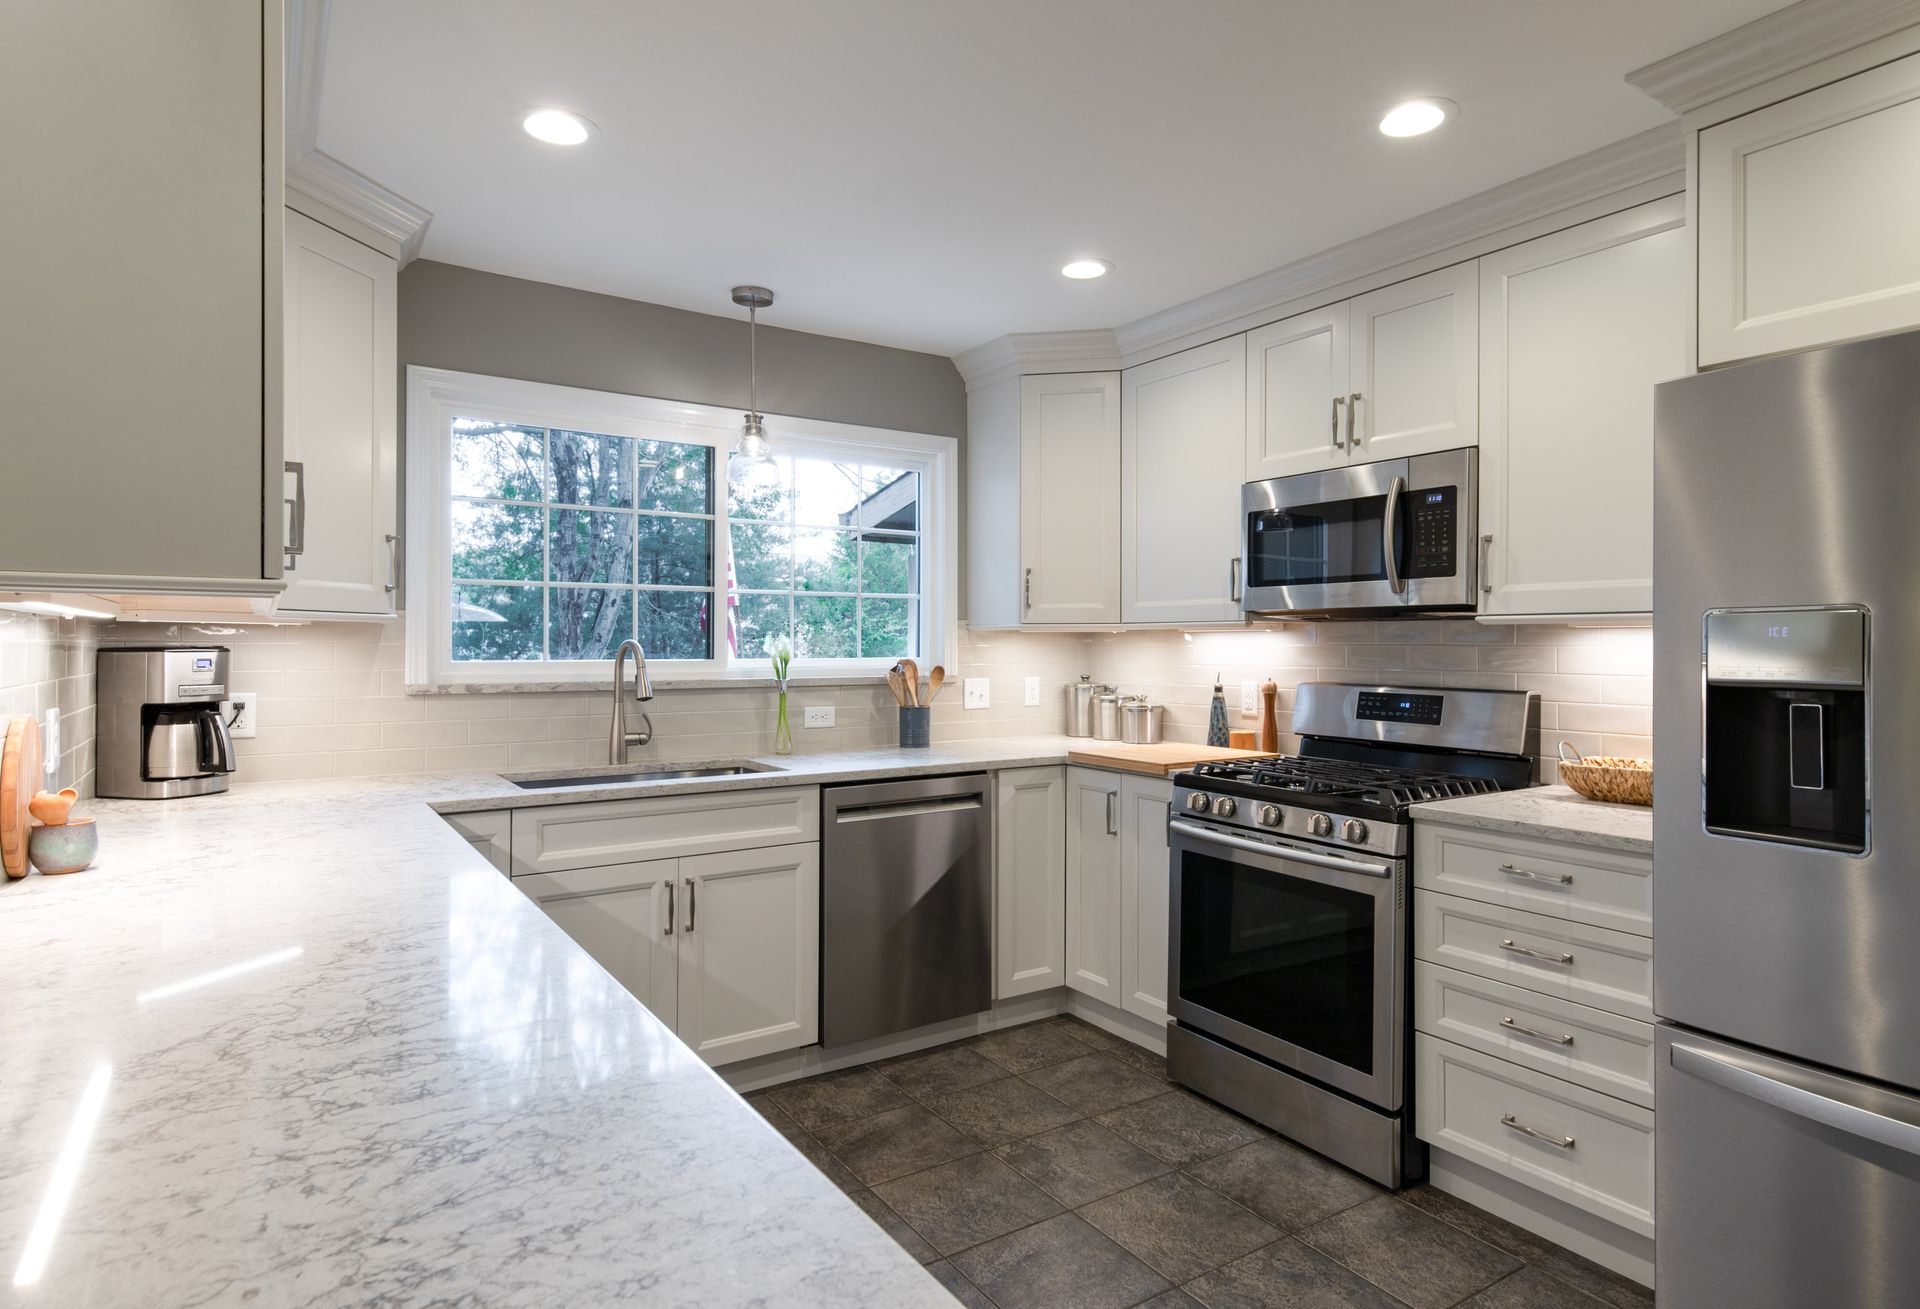 Custom Kitchen Remodel Design | St. Louis, MO | Perspective Cabinetry ...